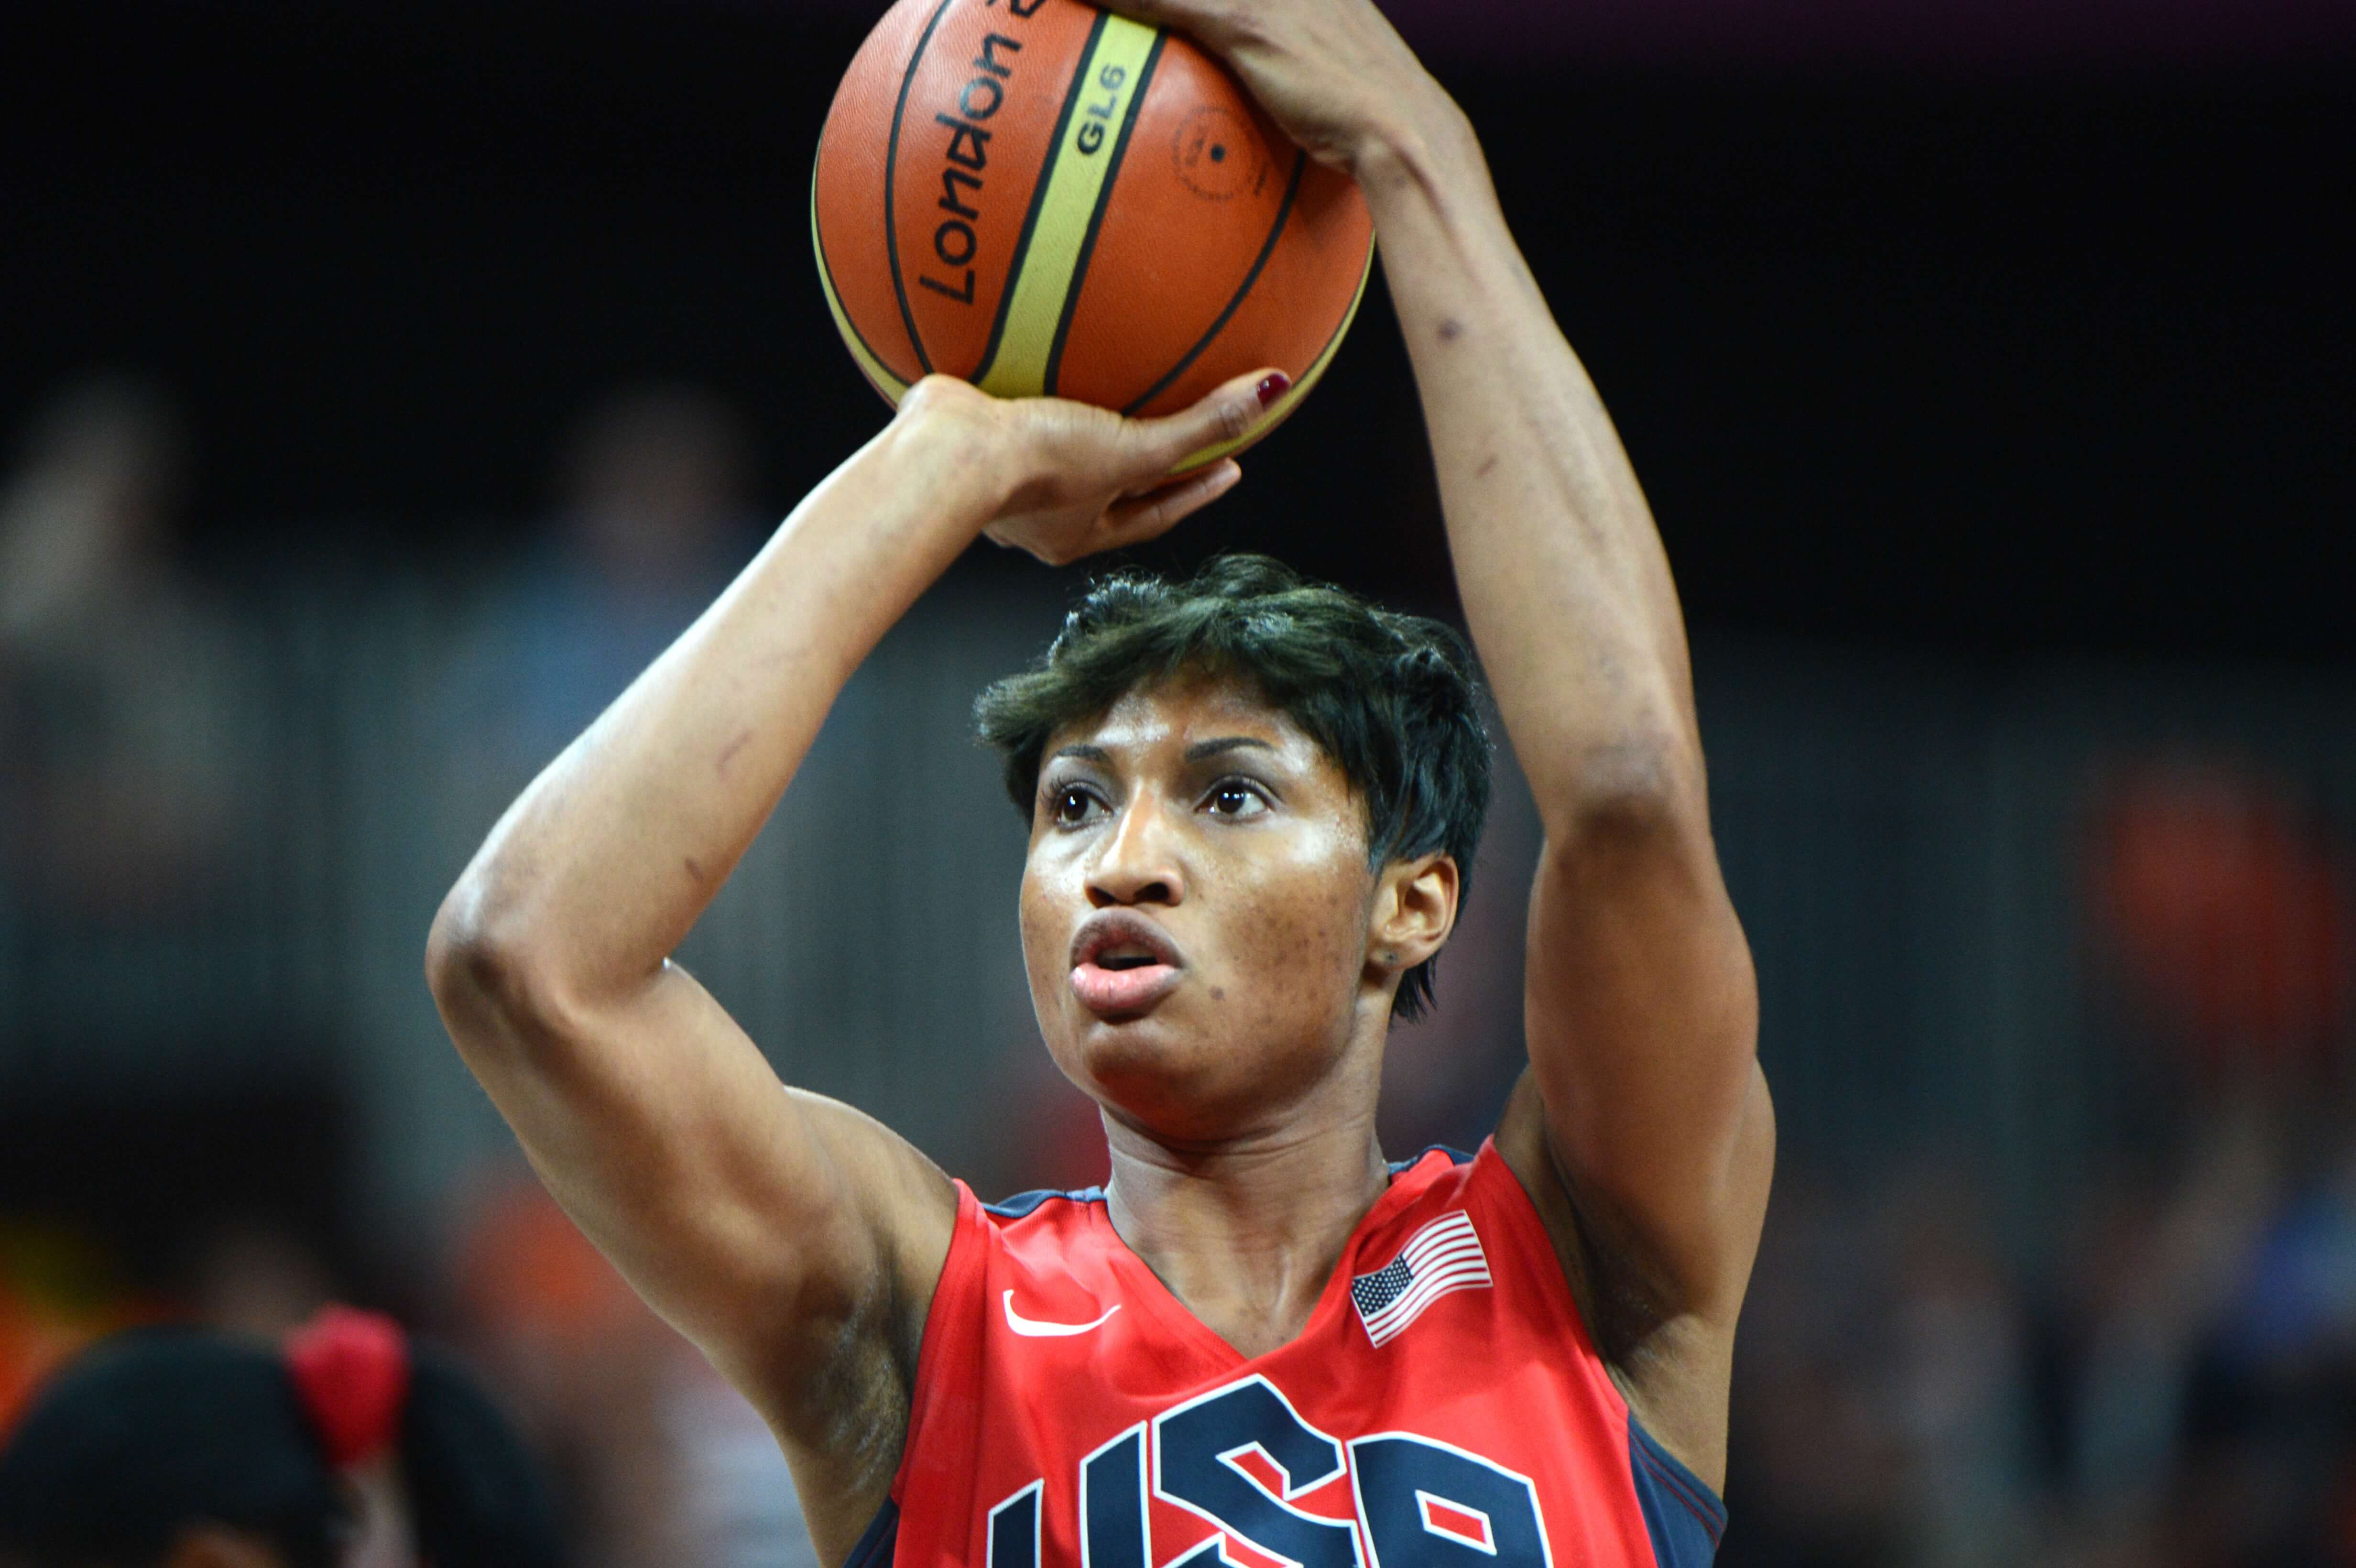 US gard Angel McCoughtry tries to score during the Women's preliminary round group A basketball match of the London 2012 Olympic Games Angola vs USA on July 30, 2012 at the basketball arena in London. USA won 90 to 38. AFP PHOTO / MARK RALSTON (Photo credit should read MARK RALSTON/AFP/GettyImages)